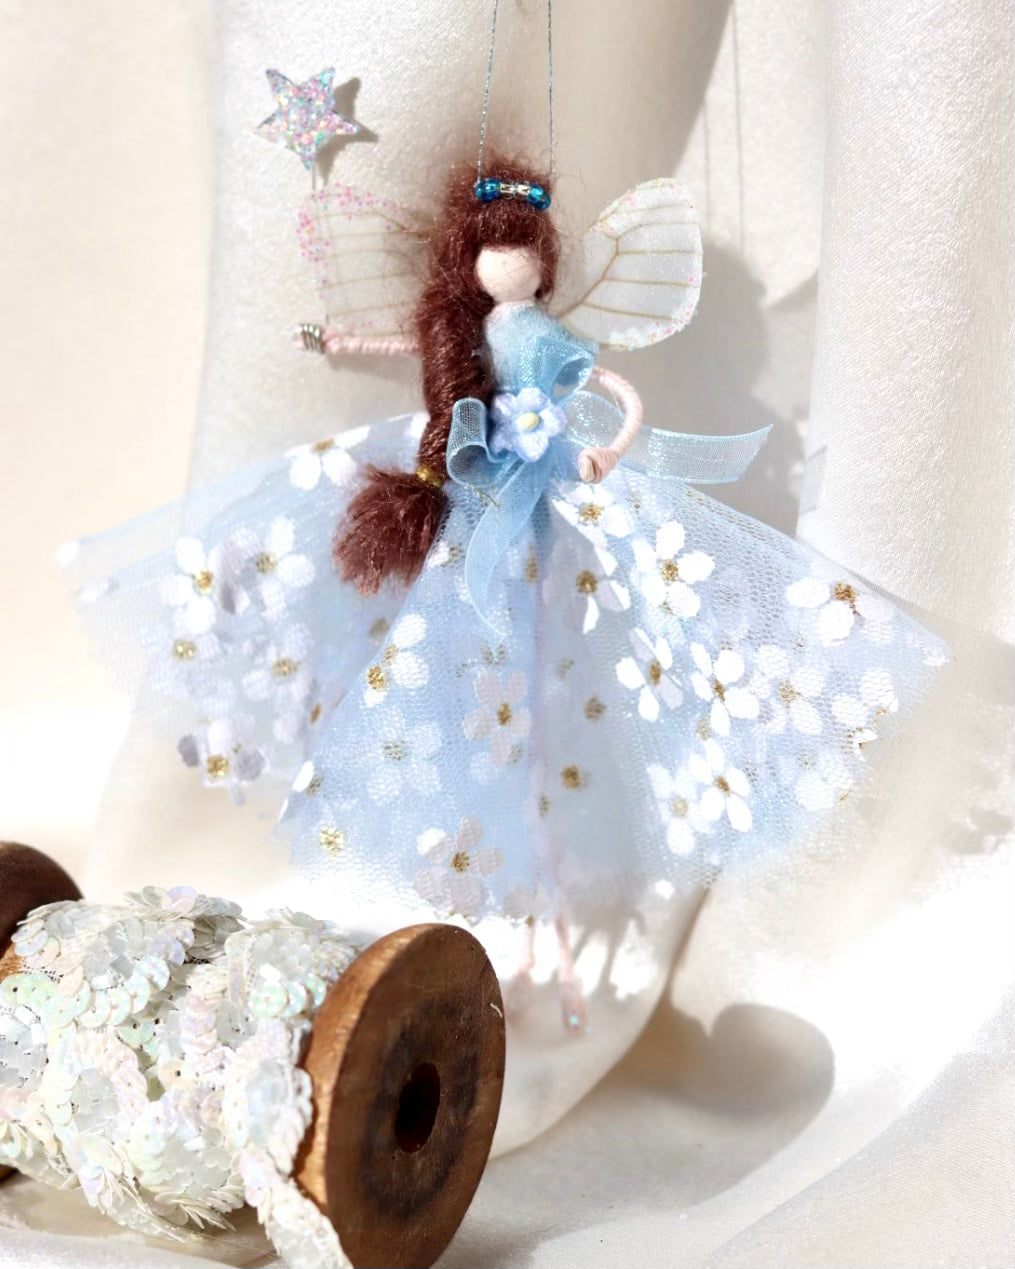 ‘Forget-me-not’ Fairy Decoration, Handmade fairy decoration that makes the perfect heirloom gift for Birthdays, Easter and Special Occasions.